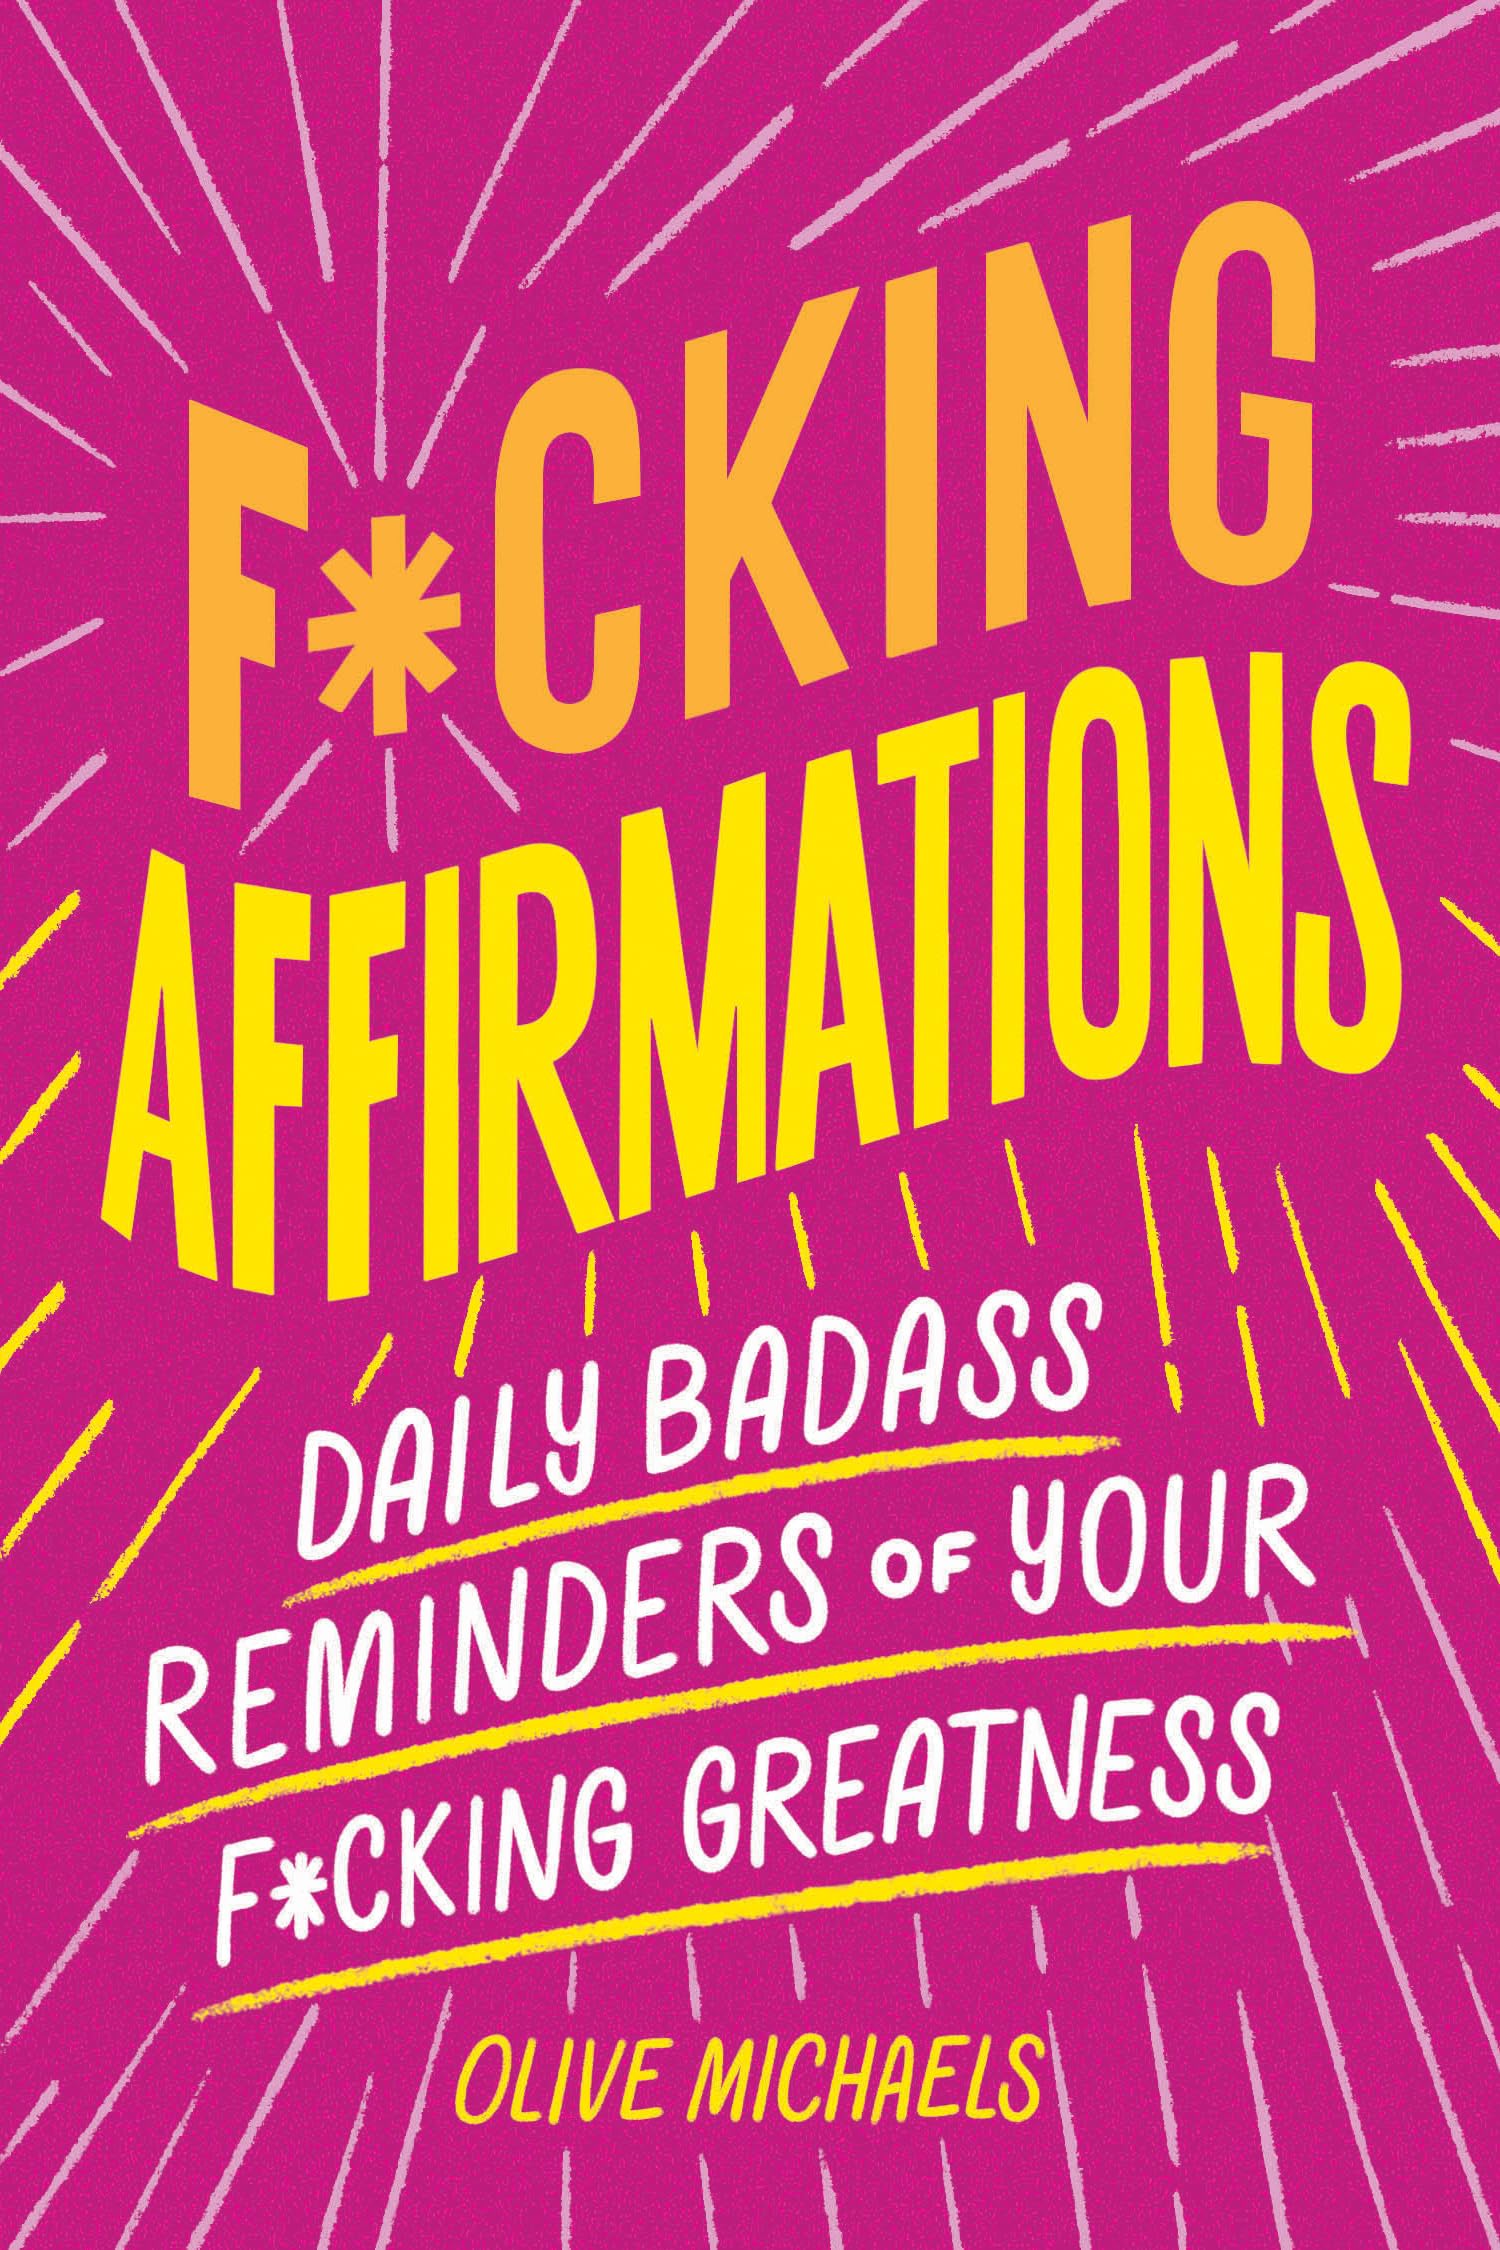 F*cking Affirmations: Daily Badass Reminders of Your F*cking Greatness by Michaels, Olive